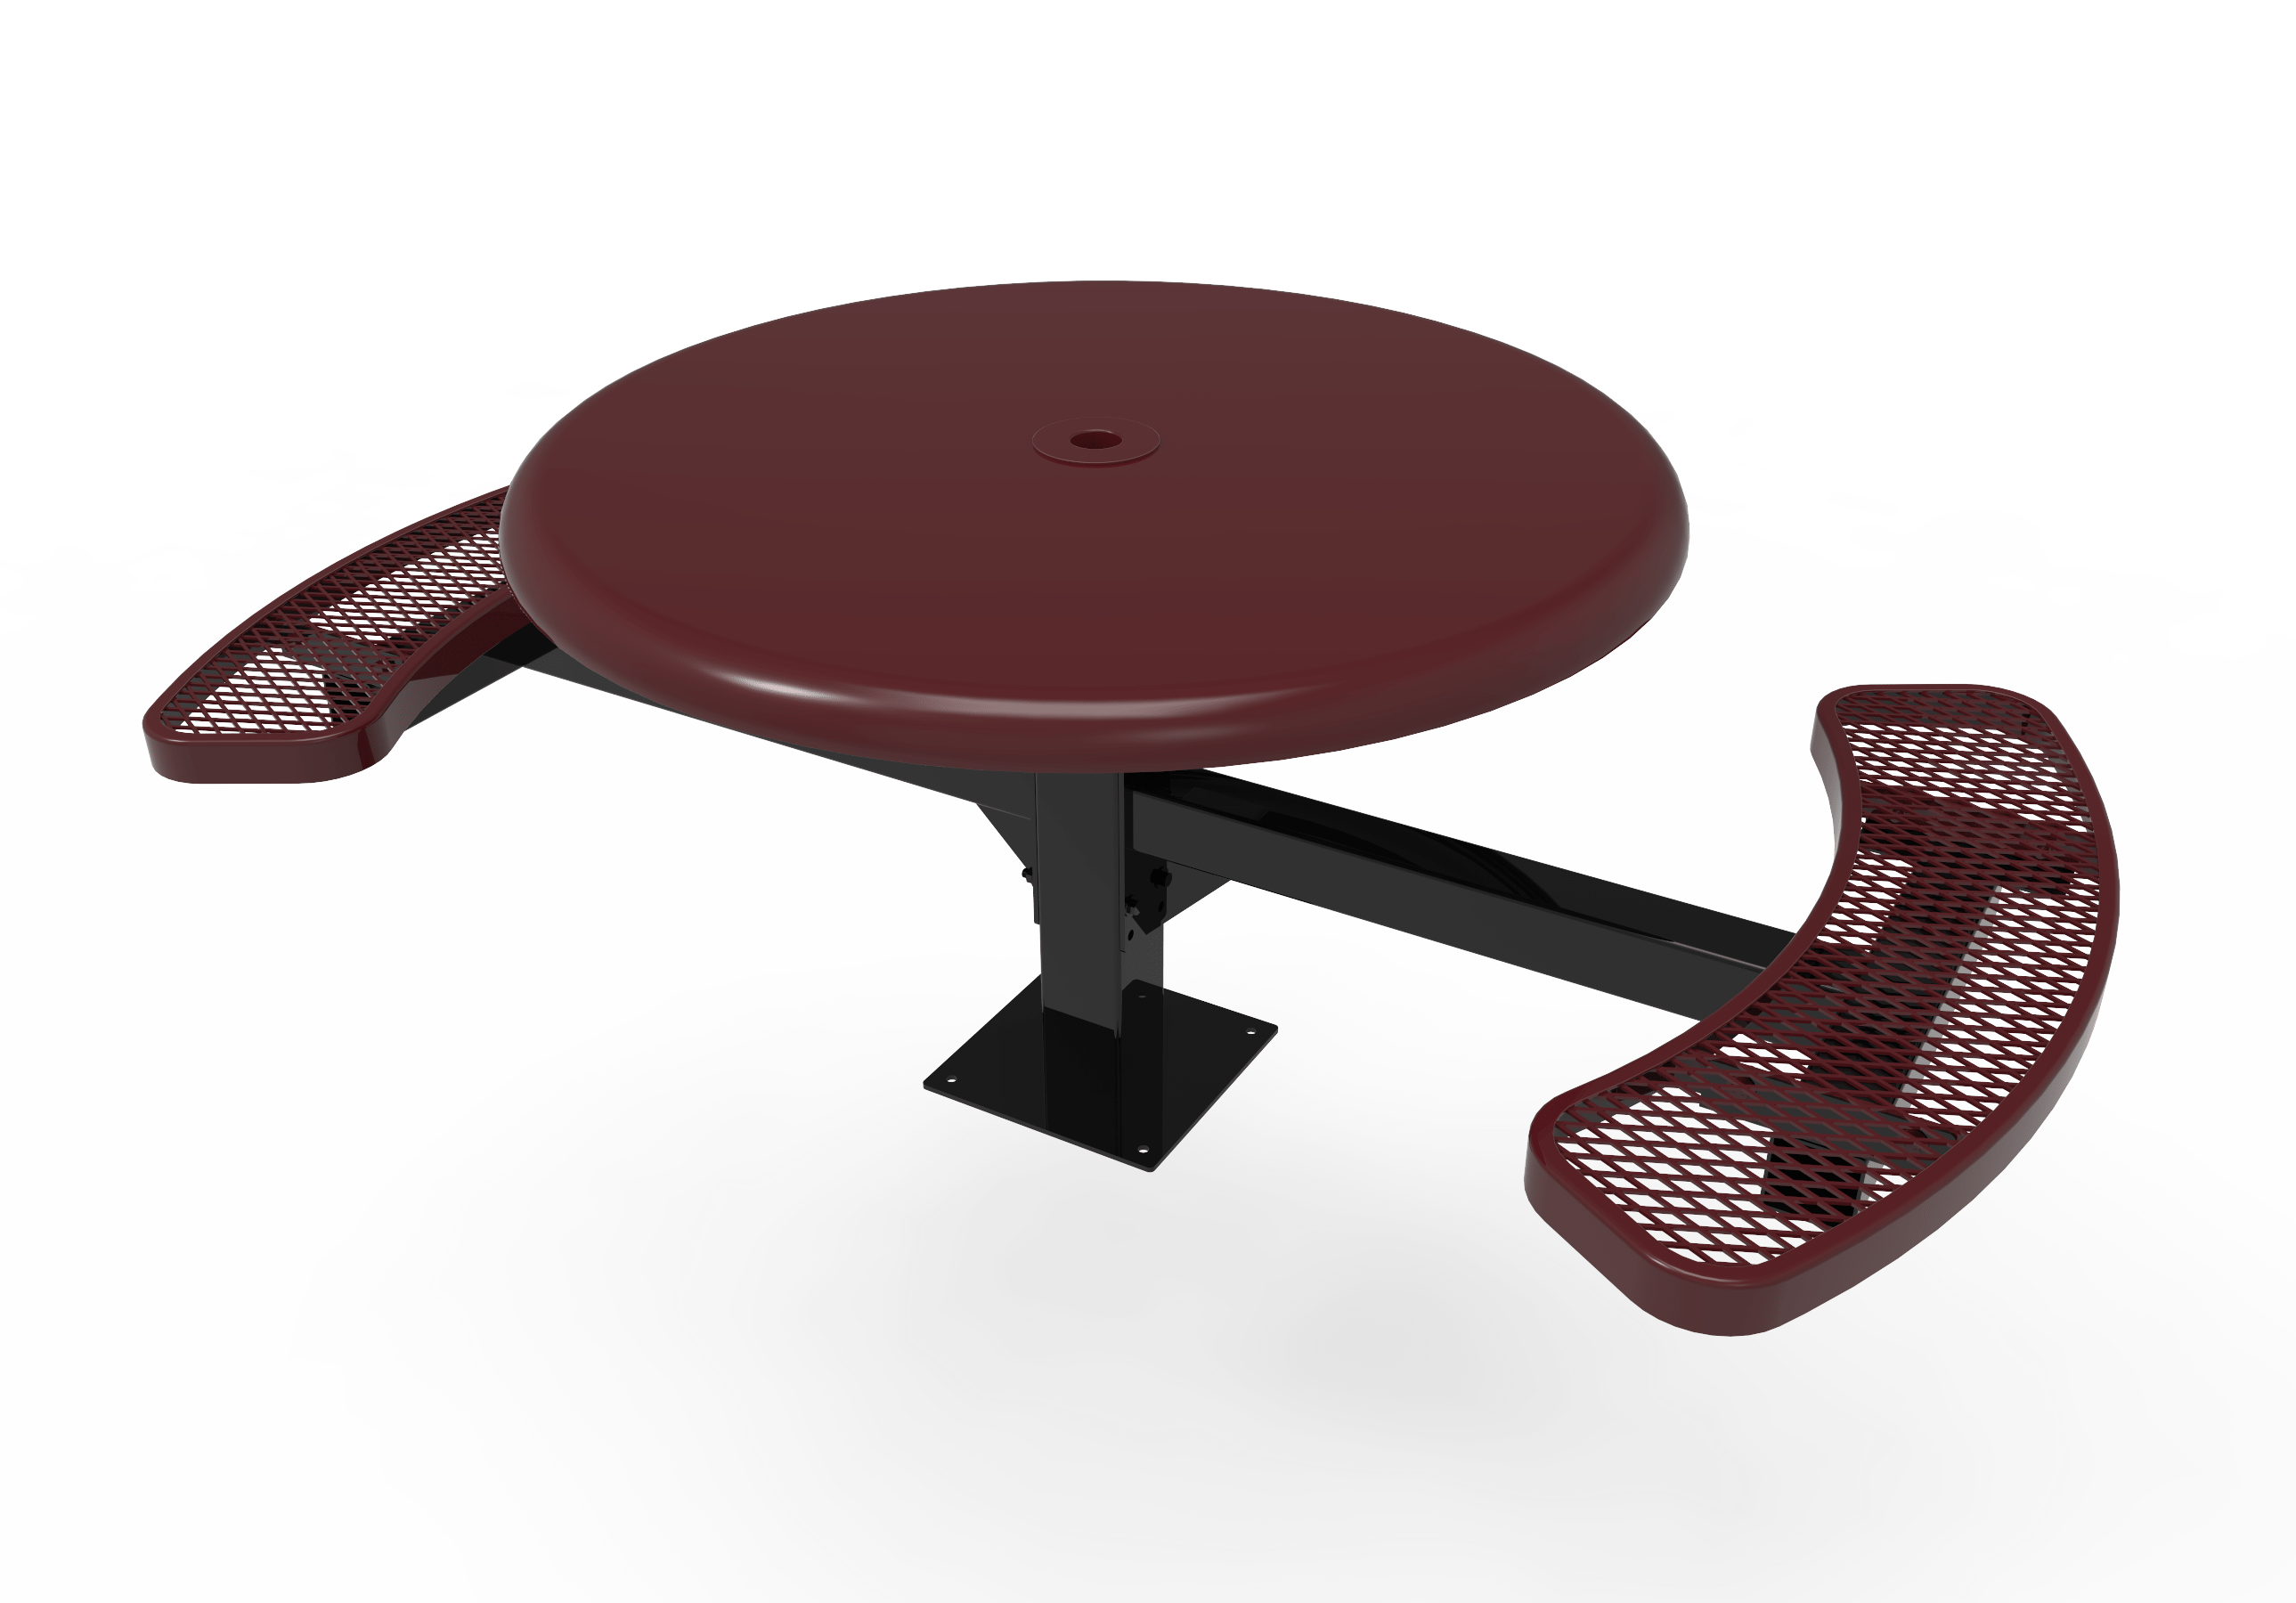 46″ Round Solid Top Pedestal Surface Table 2 Seat-Mesh
TRS46-C-17-002
Industry Standard Finish
$1639.00
TRS46-A-17-002
Advantage Premium Finish
$2099.00
